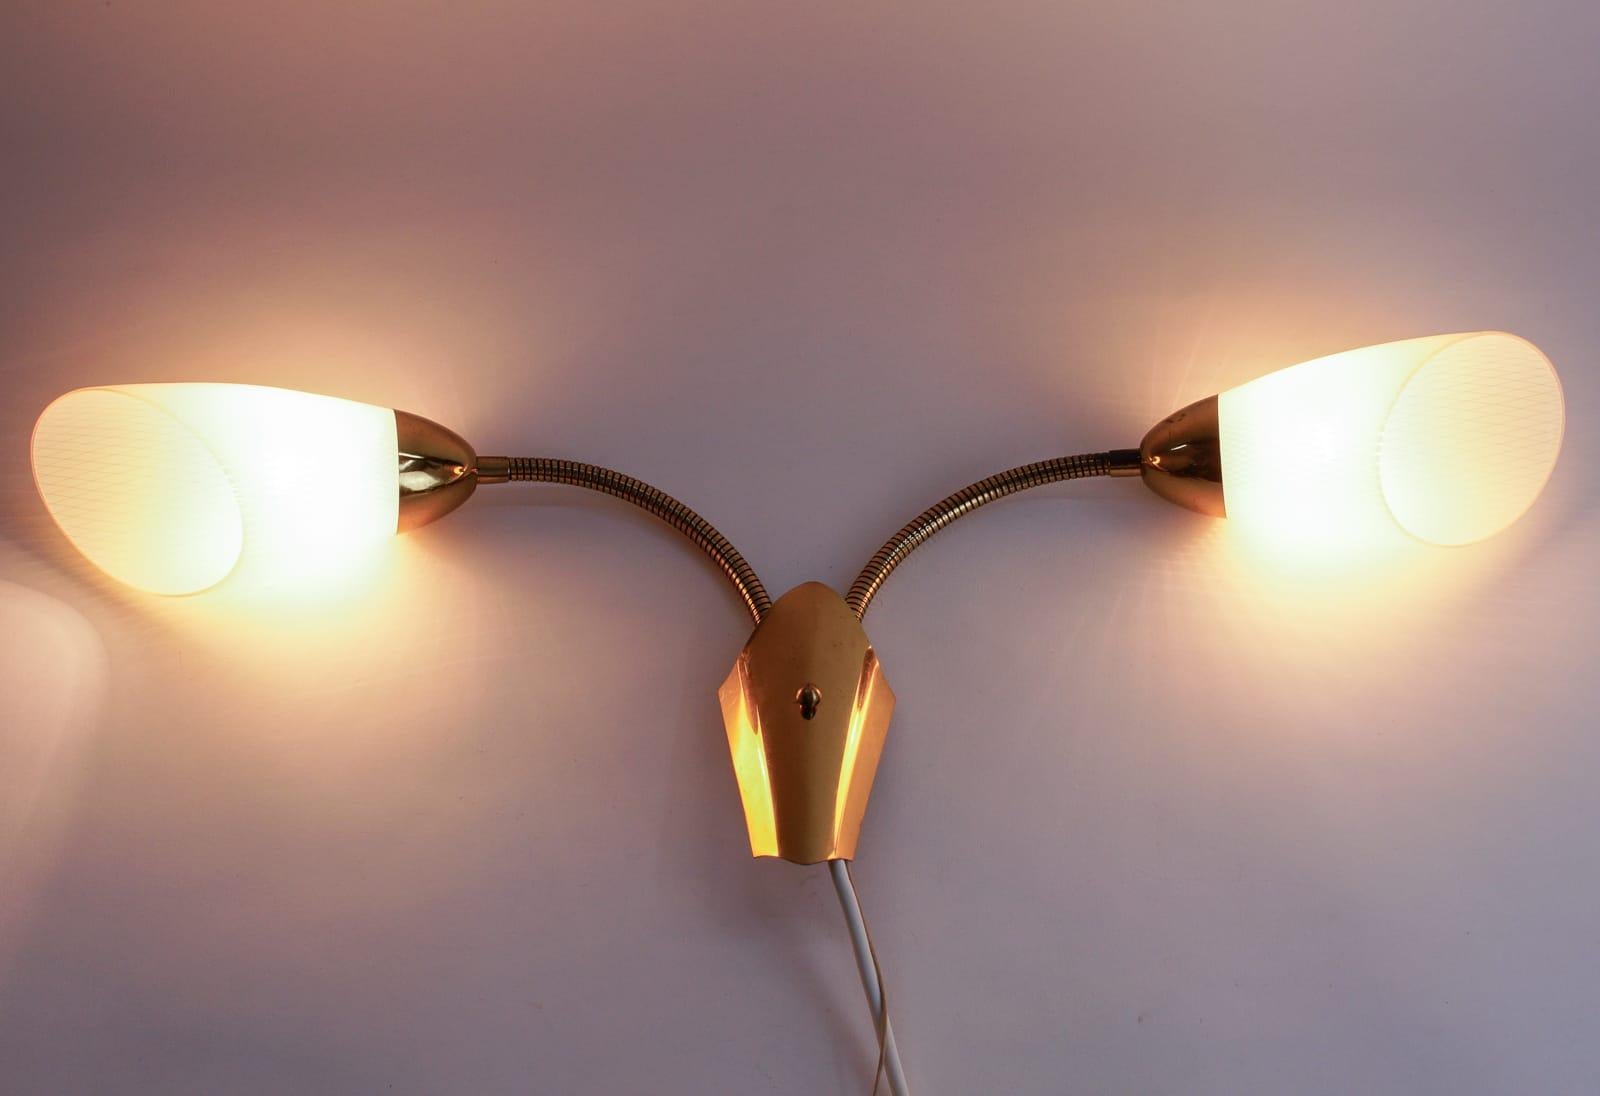 Pair of Double Arm Wall Lamps with Flexible Arms from the 1950s, Probably Italy For Sale 4